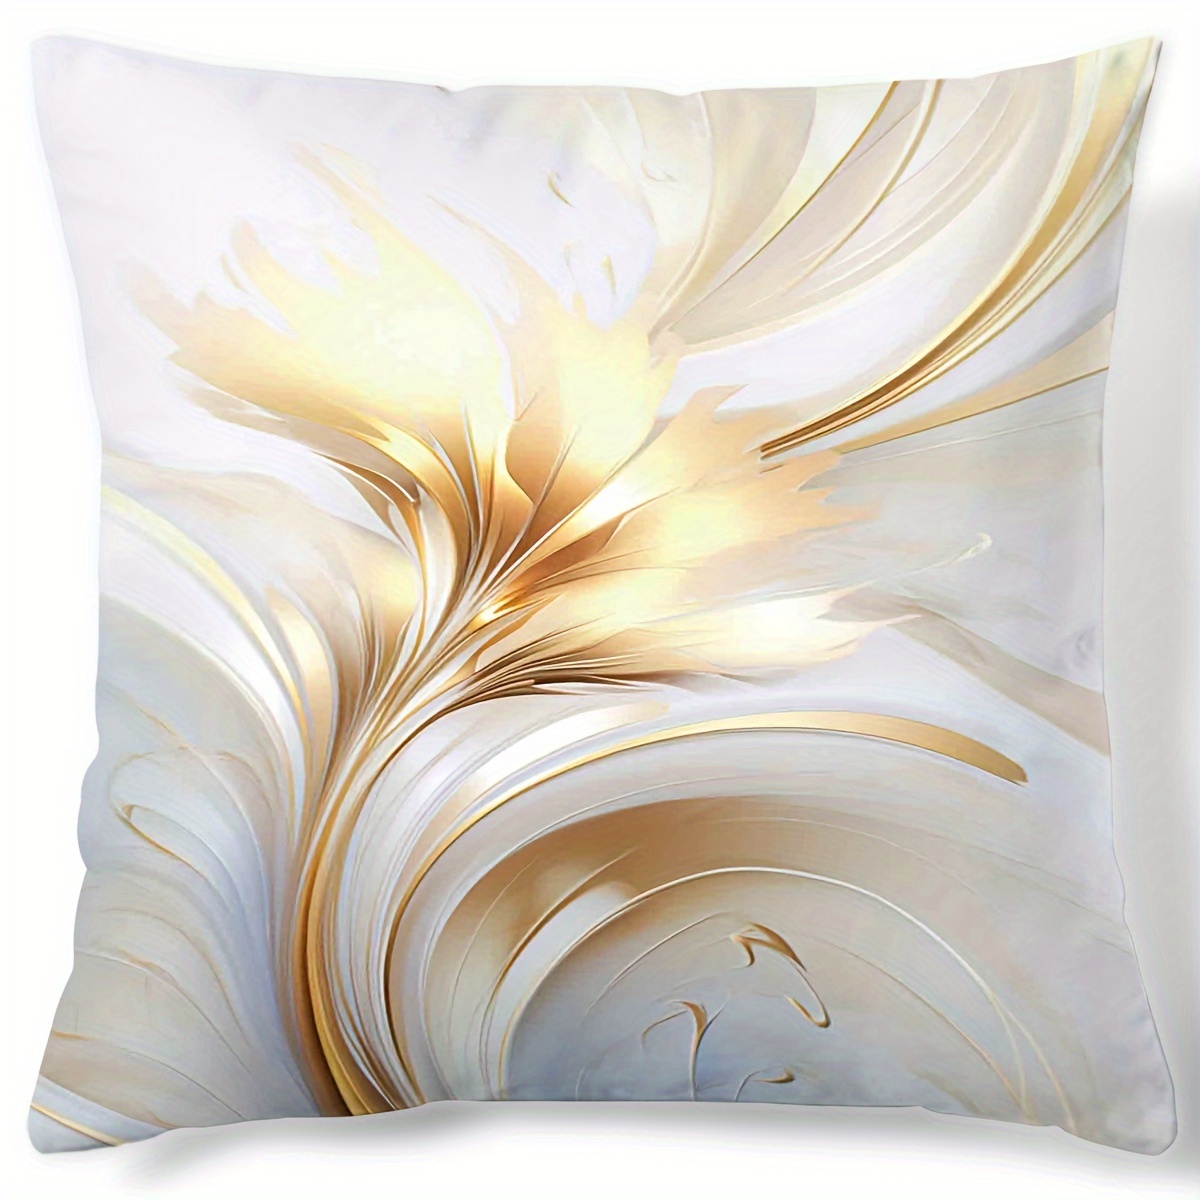 

1pc, Digital Printed Pillowcase With A Pattern Of Gilded Floral Motifs